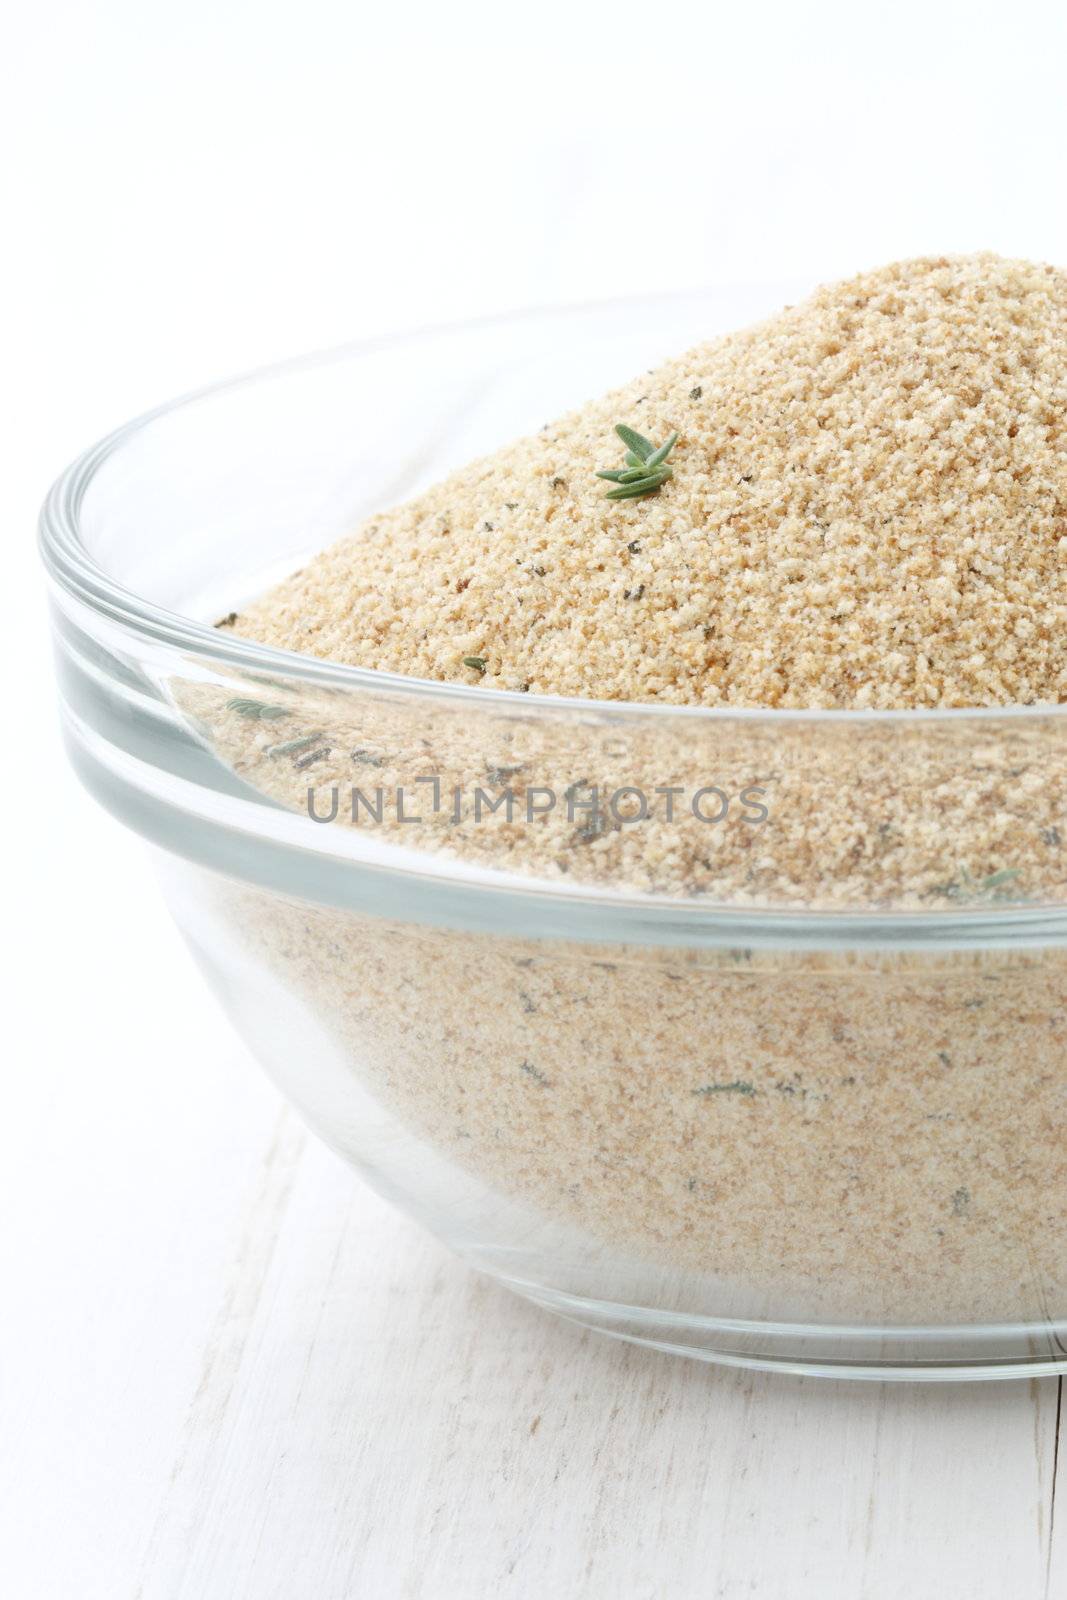 bread crumbs or breaded ingredient used to make fried chicken milanese chicken , nuggets and other delicious breaded foods 